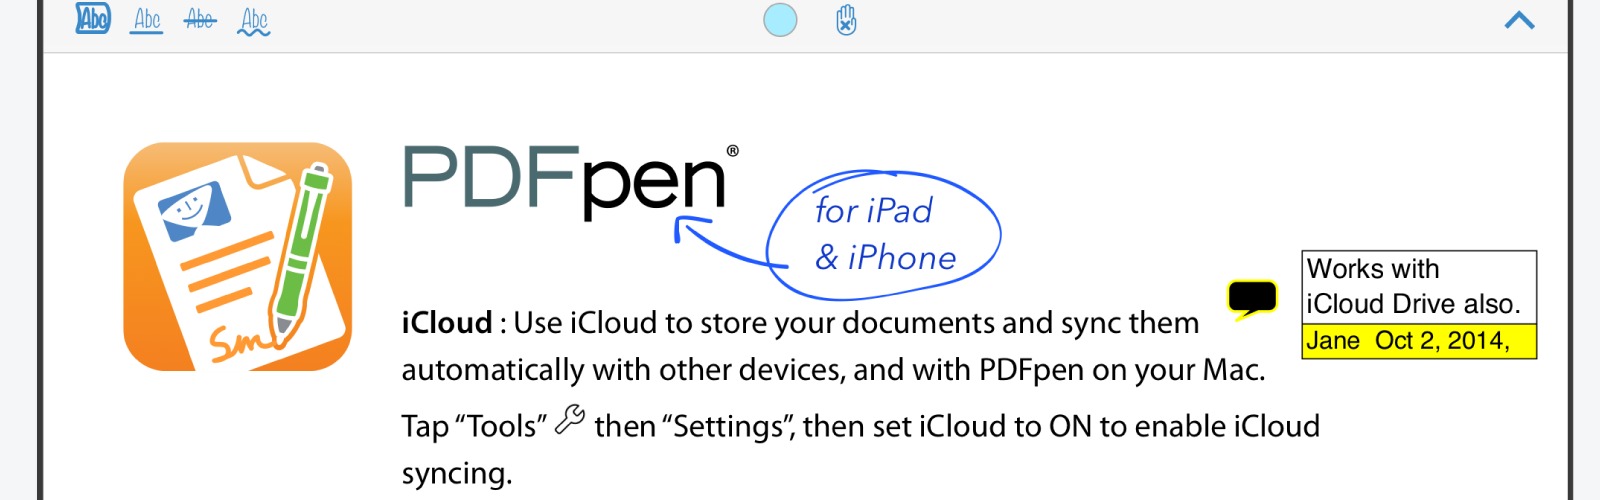 pdfpen coupon code